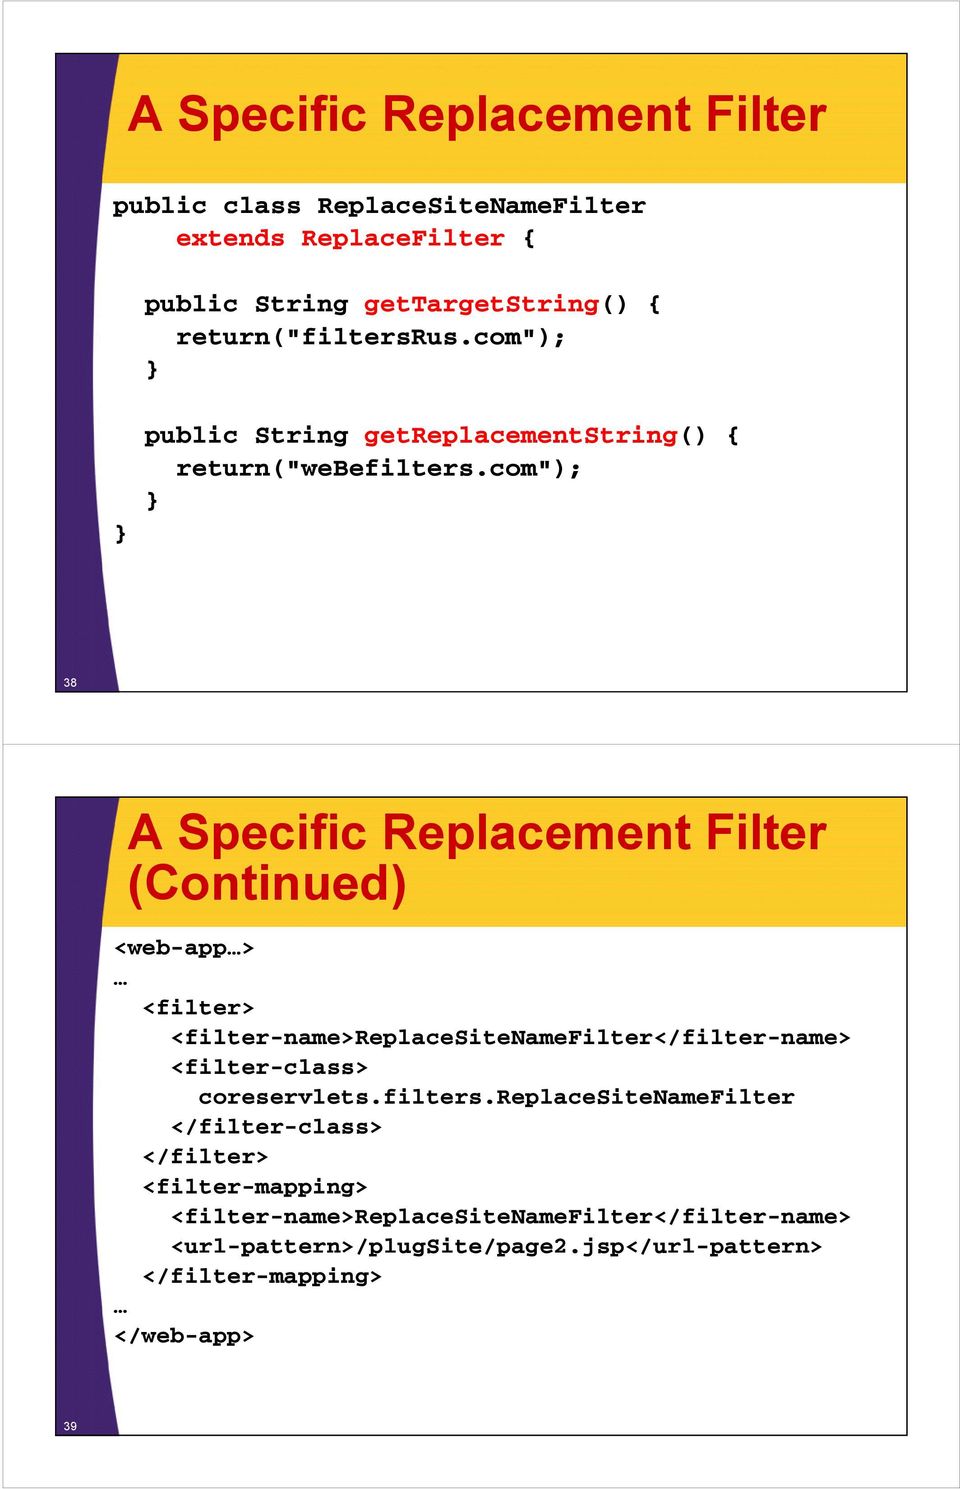 com"); 38 A Specific Replacement Filter (Continued) <web-app > <filter> <filter-name>replacesitenamefilter</filter-name> <filter-class>